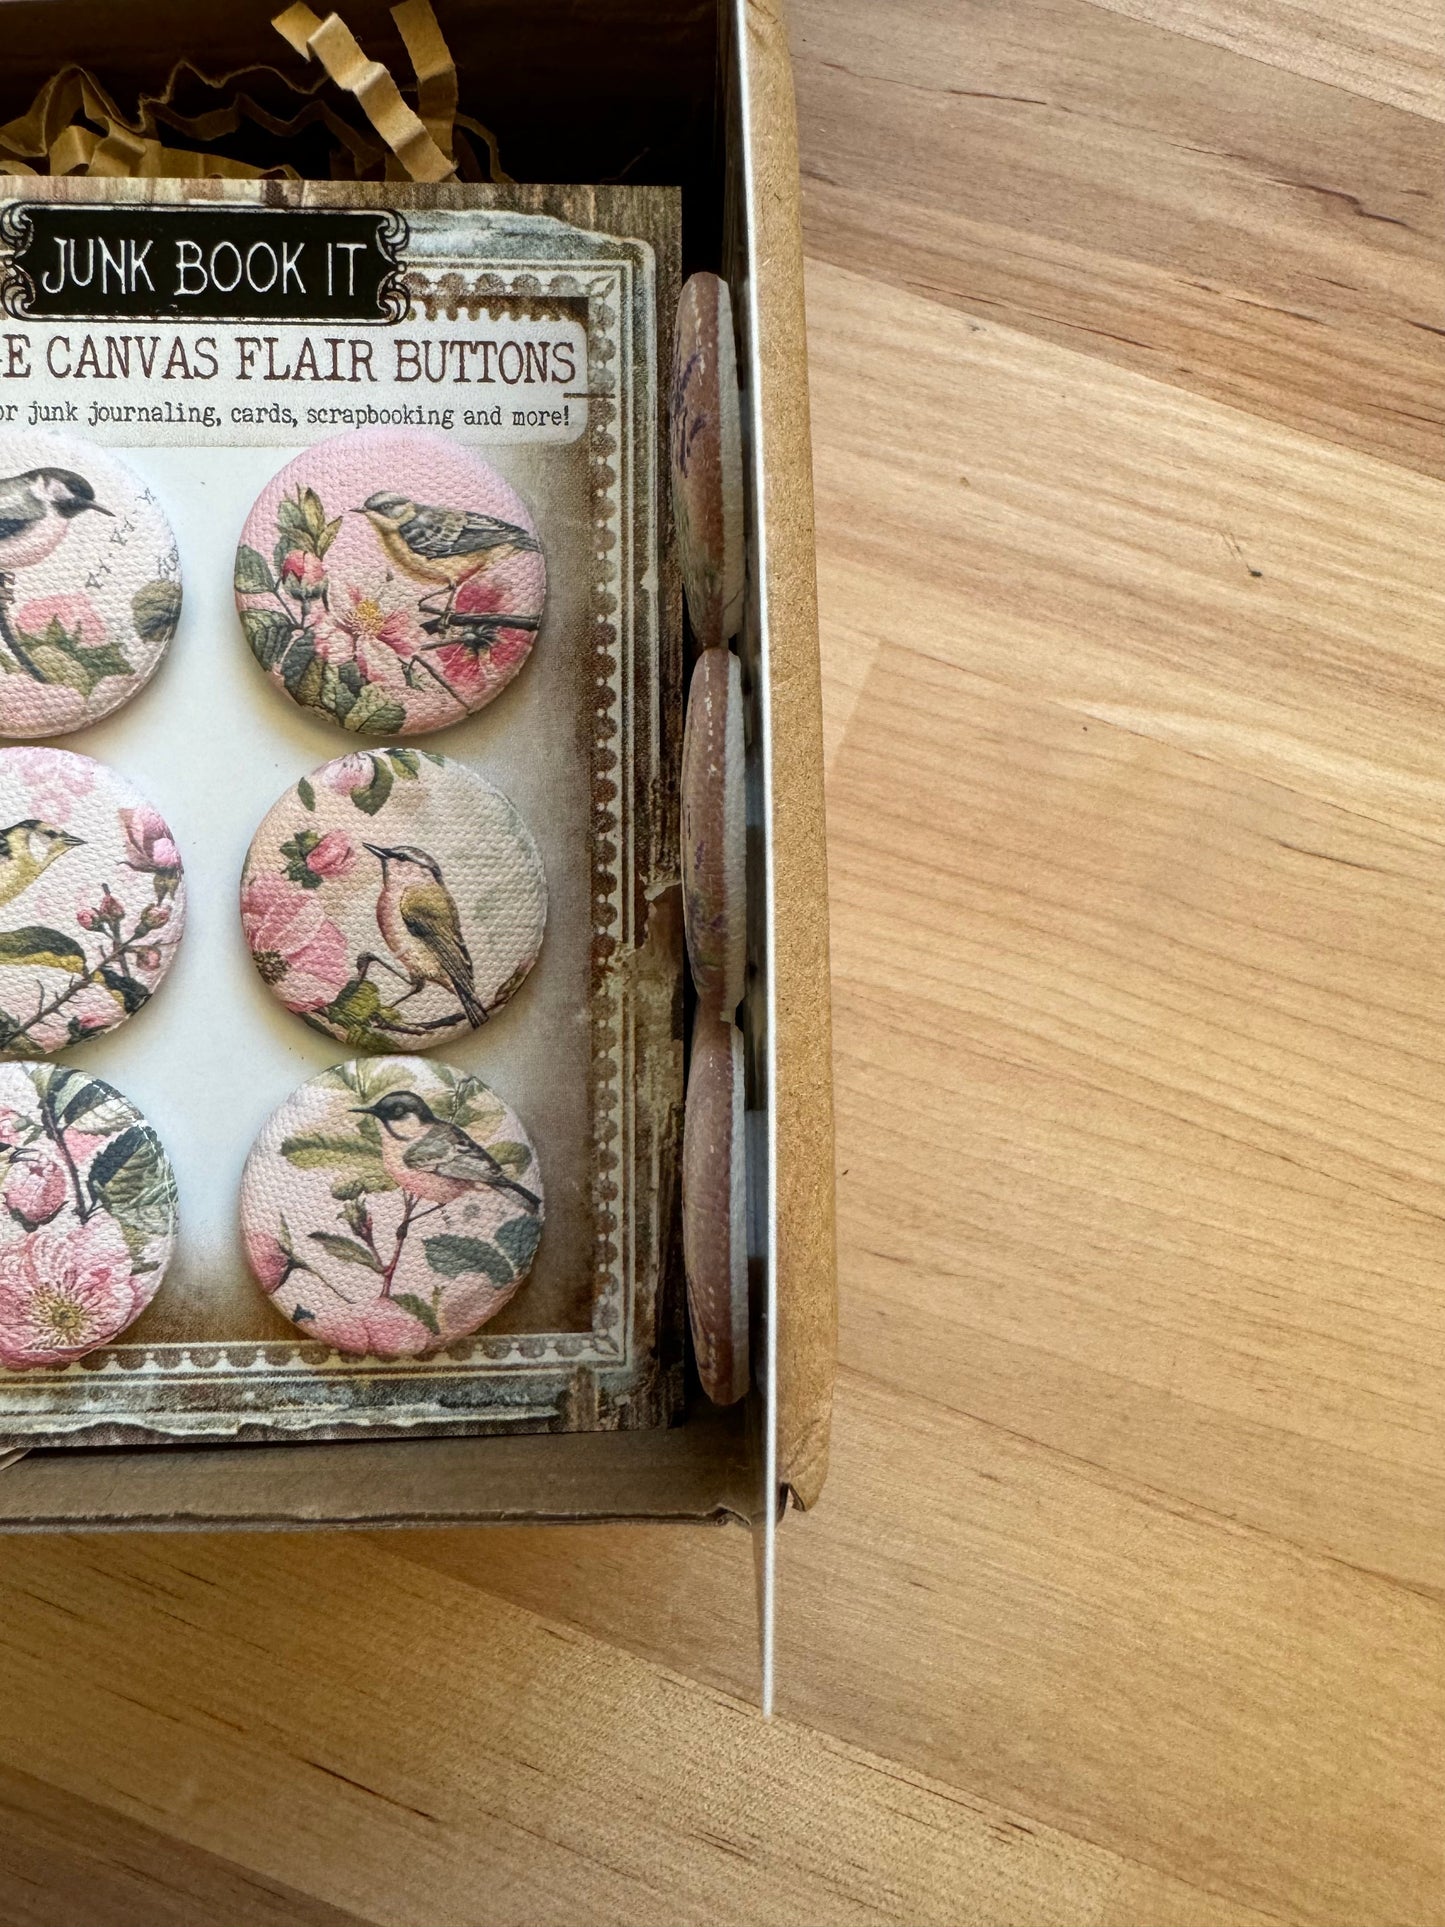 Vintage Chess Canvas Flair Buttons